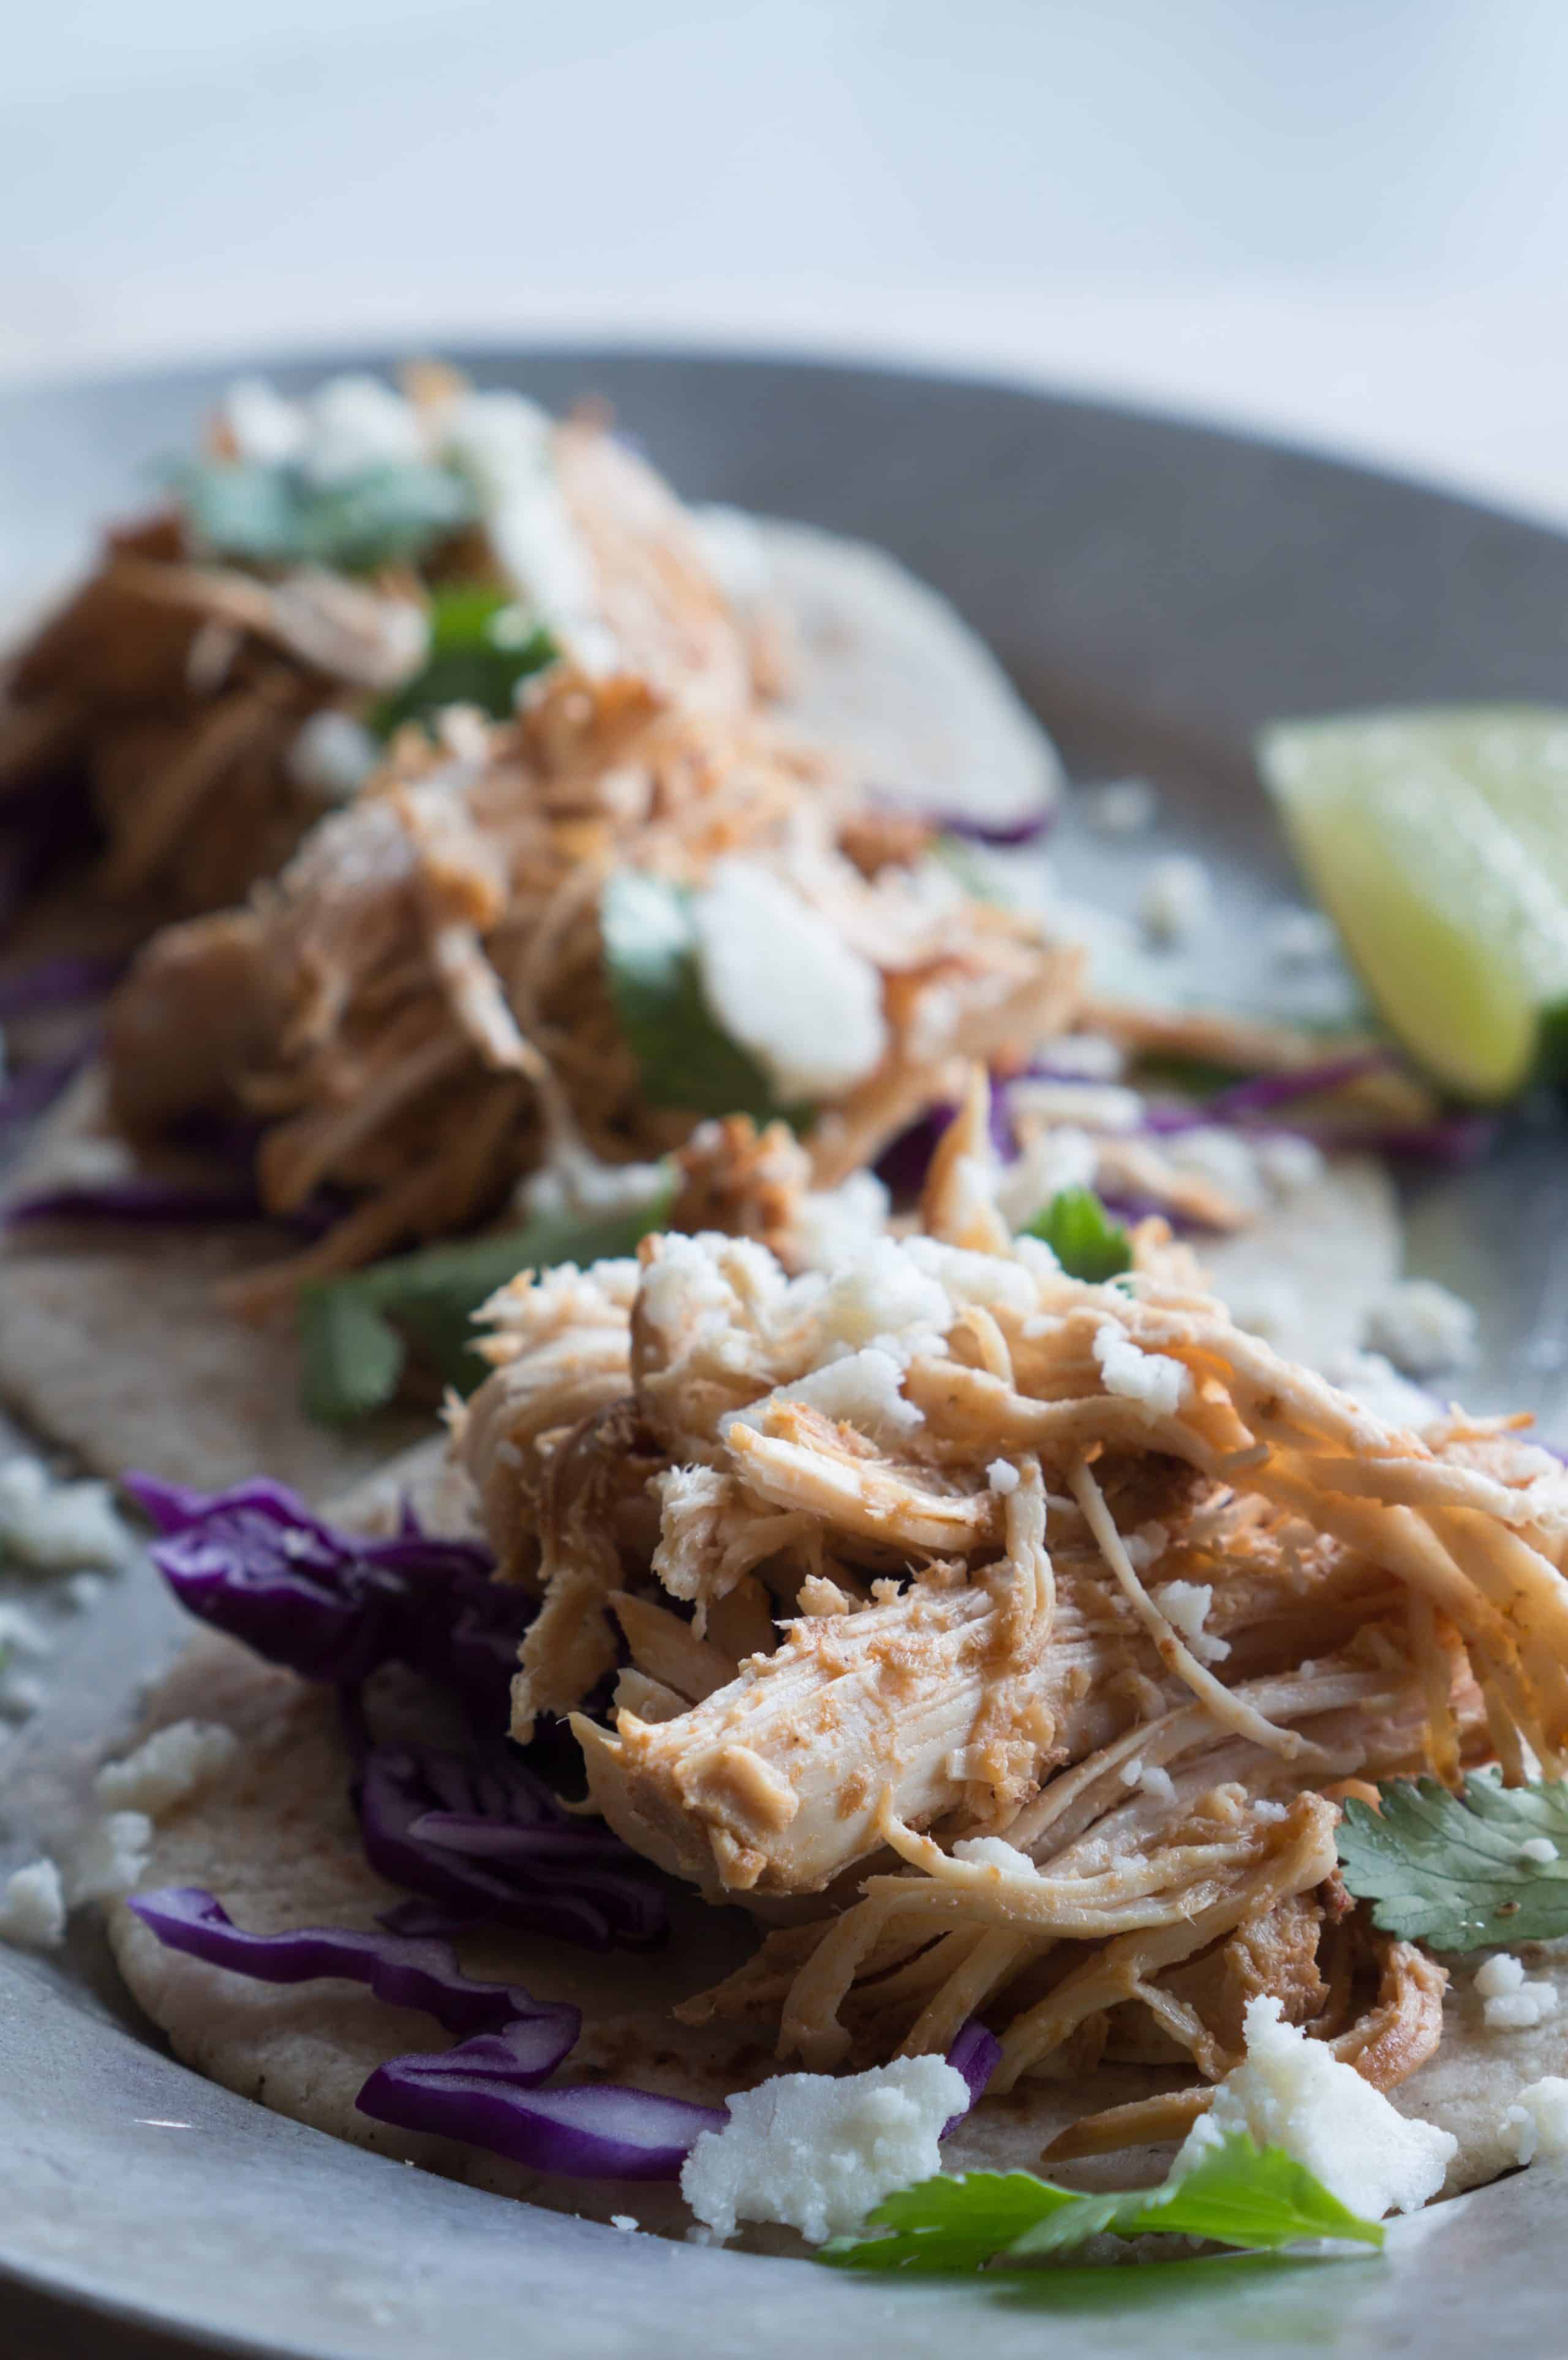 Shredded Chicken Street Tacos – We love this gluten-free recipe for Shredded Chicken Street Tacos! It is so simple to throw together as a weeknight dinner or for a big get-together. Put your slow cooker to work to turn lean, protein-packed chicken breasts into these tasty little tacos. Top them with fresh cilantro, crumbled cotija cheese, crunchy cabbage slaw, spicy salsa, creamy guacamole, or a squeeze of lime juice. Deck them out however you please! ♥ | freeyourfork.com